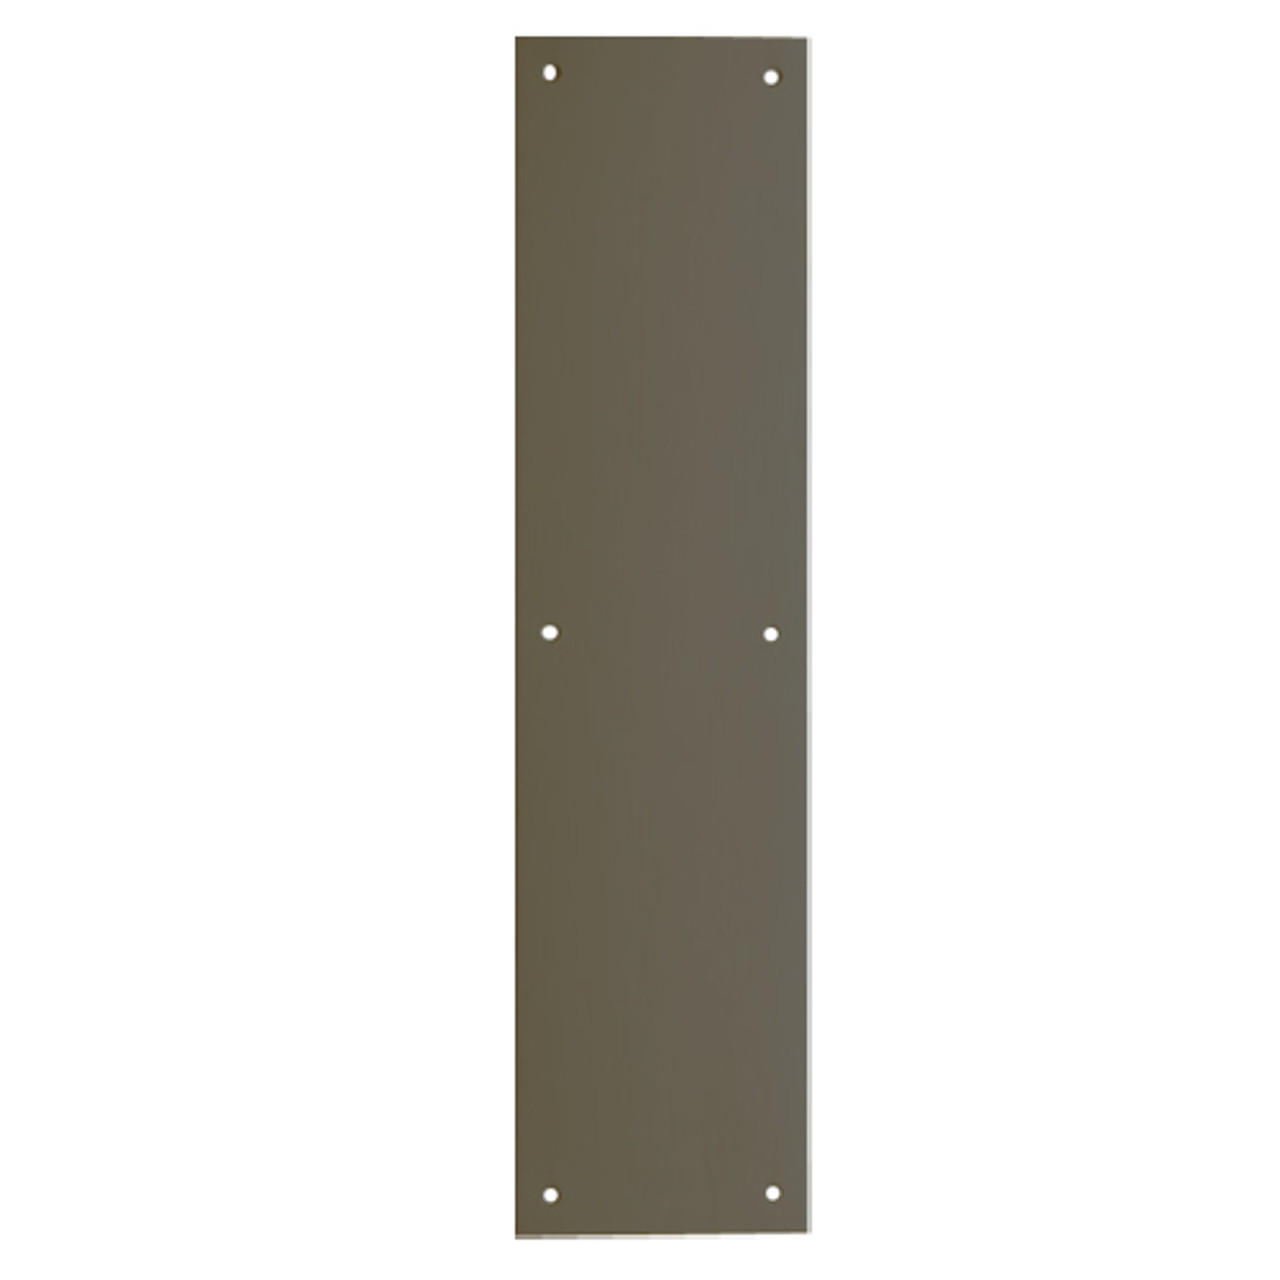 8200-US10B-8x16 IVES Architectural Door Trim 8x16 Inch Push Plate in Oil Rubbed Bronze